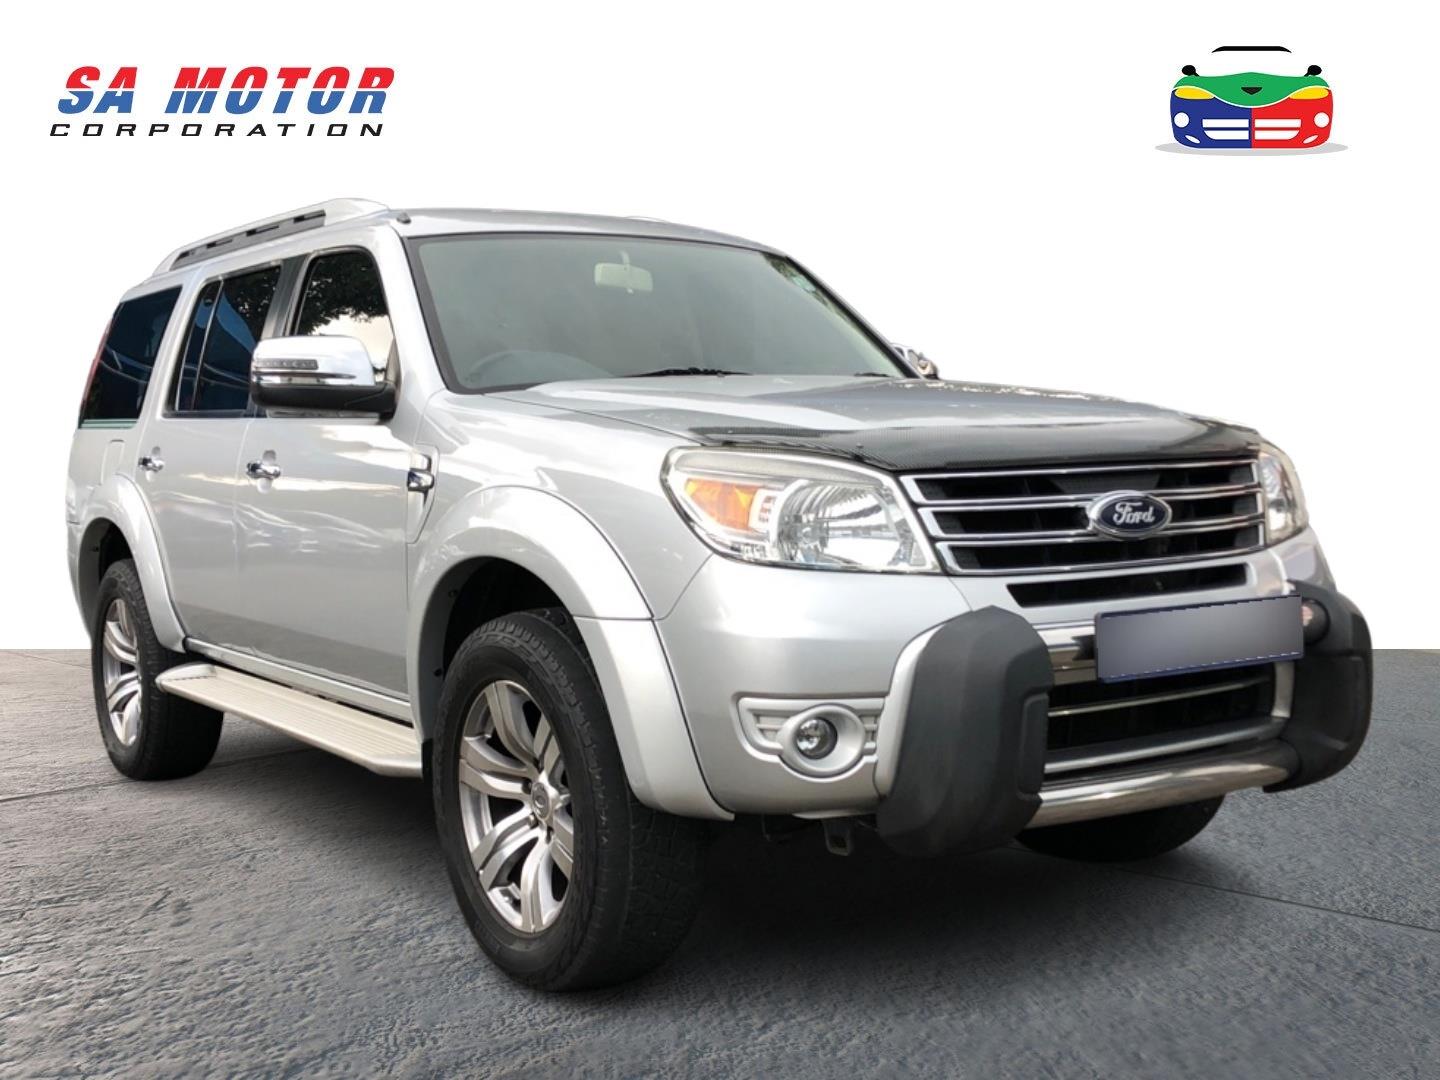 2013 Ford Everest 3.0 Tdci Xlt 4X2 for sale - 326779